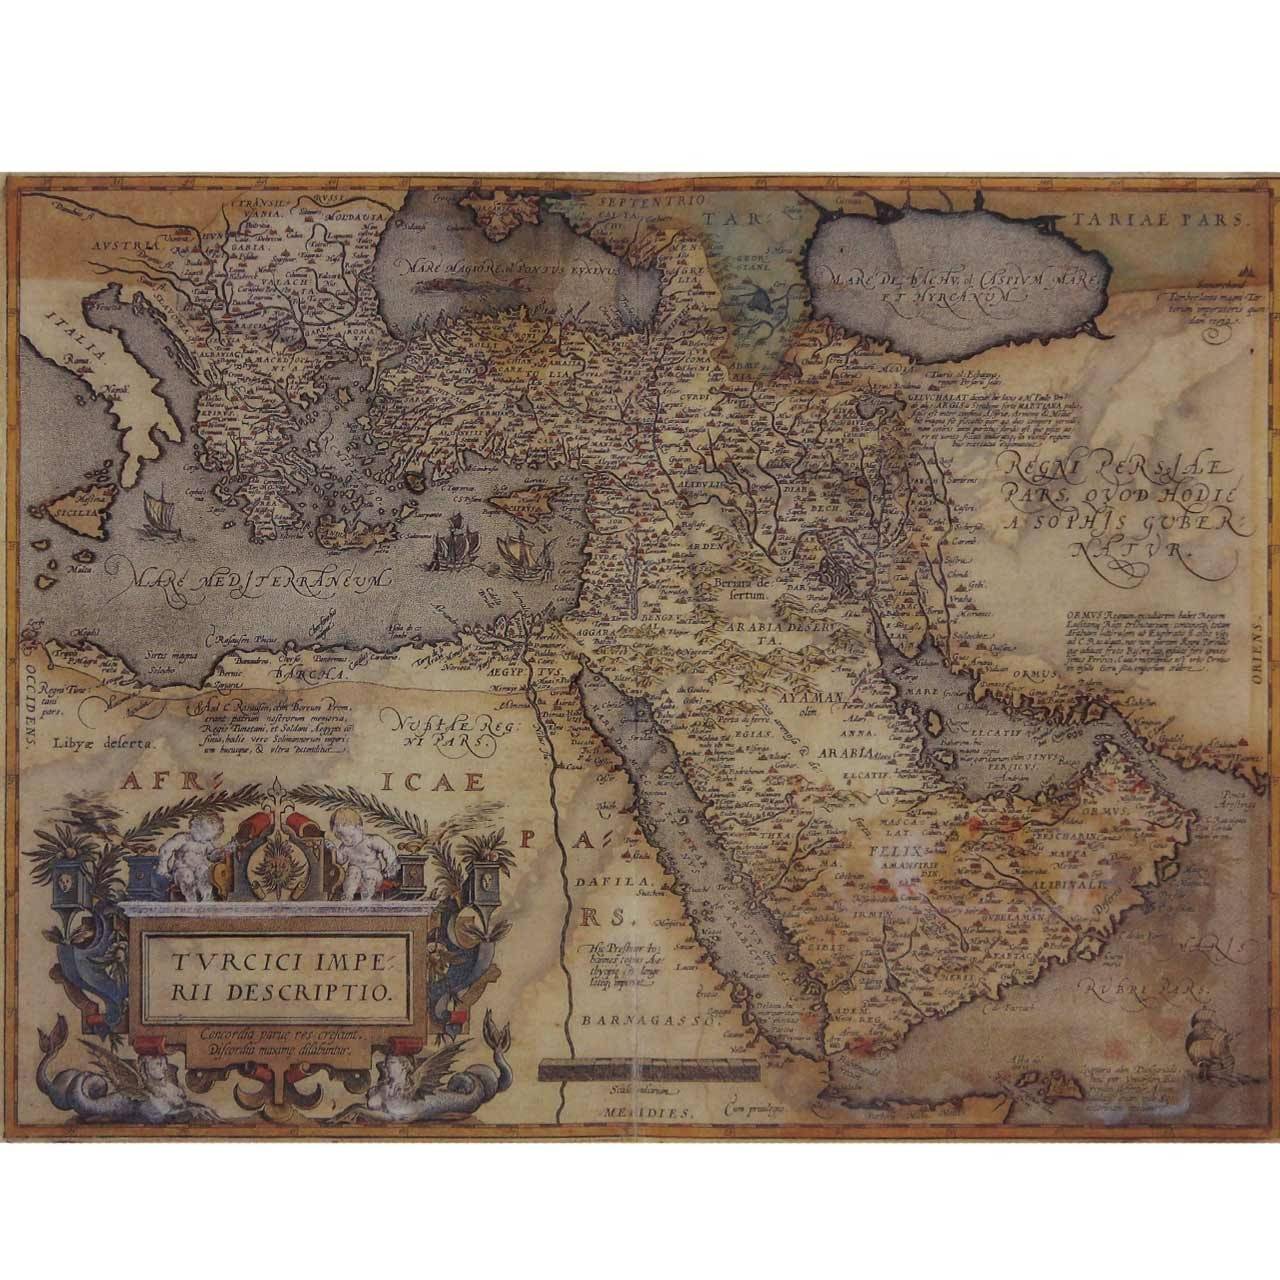 American Classical Grouping of Six Prints Featuring Antique Maps by Abraham Ortelius